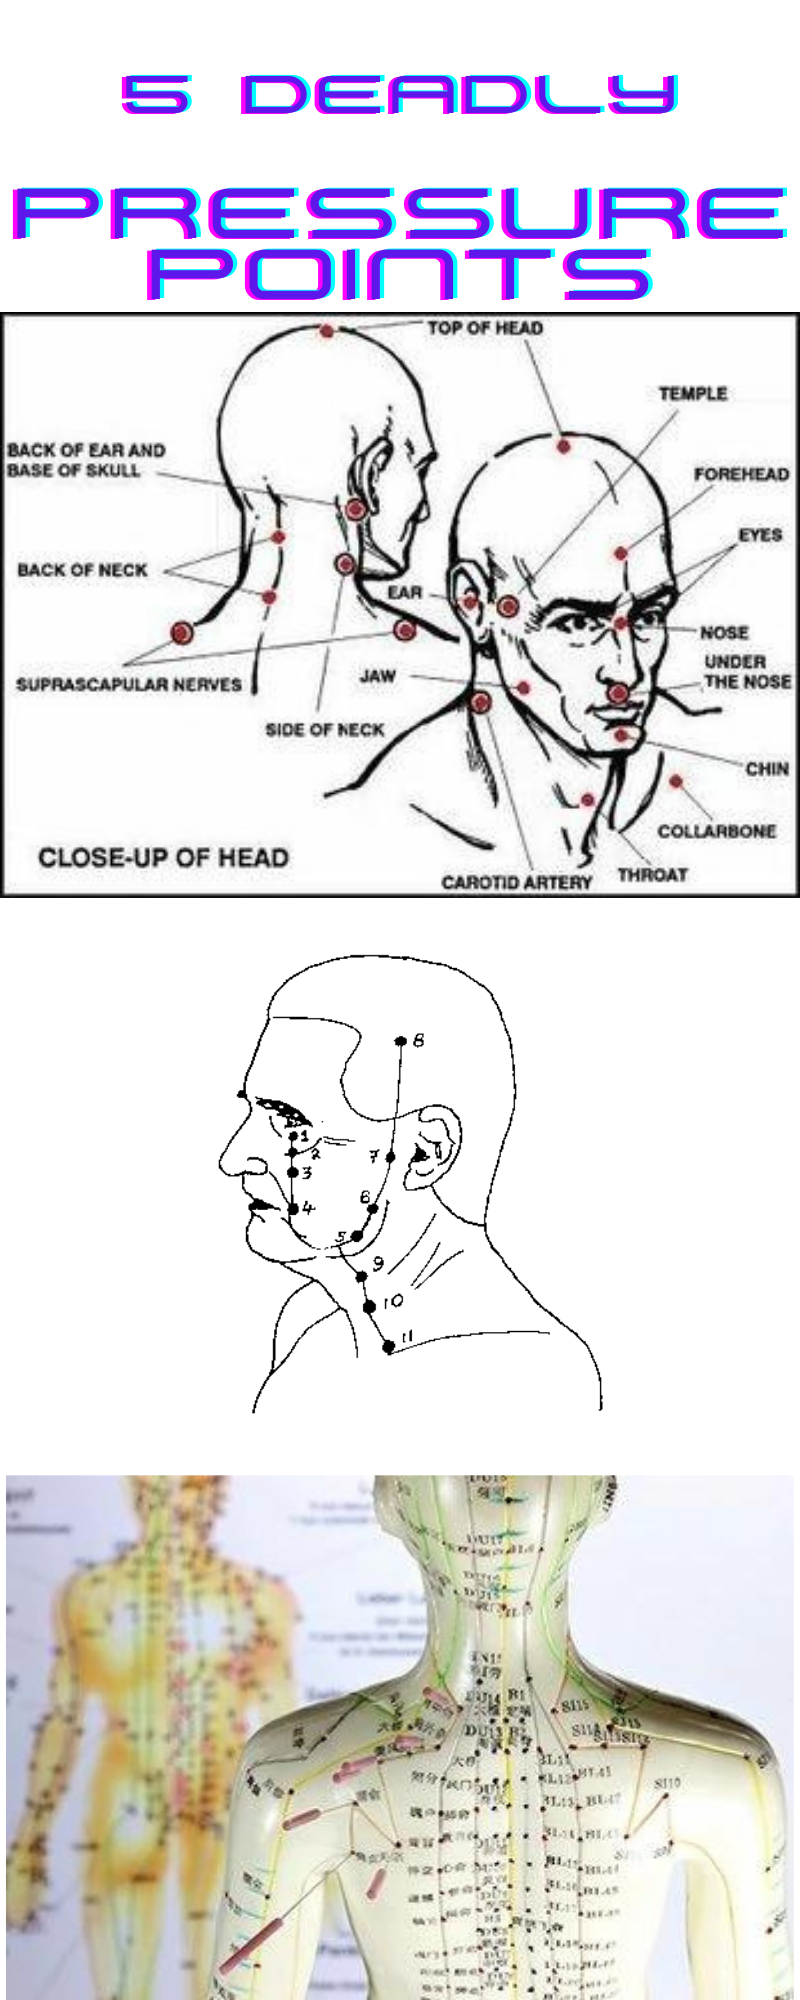 *5 Deadly Pressure Points